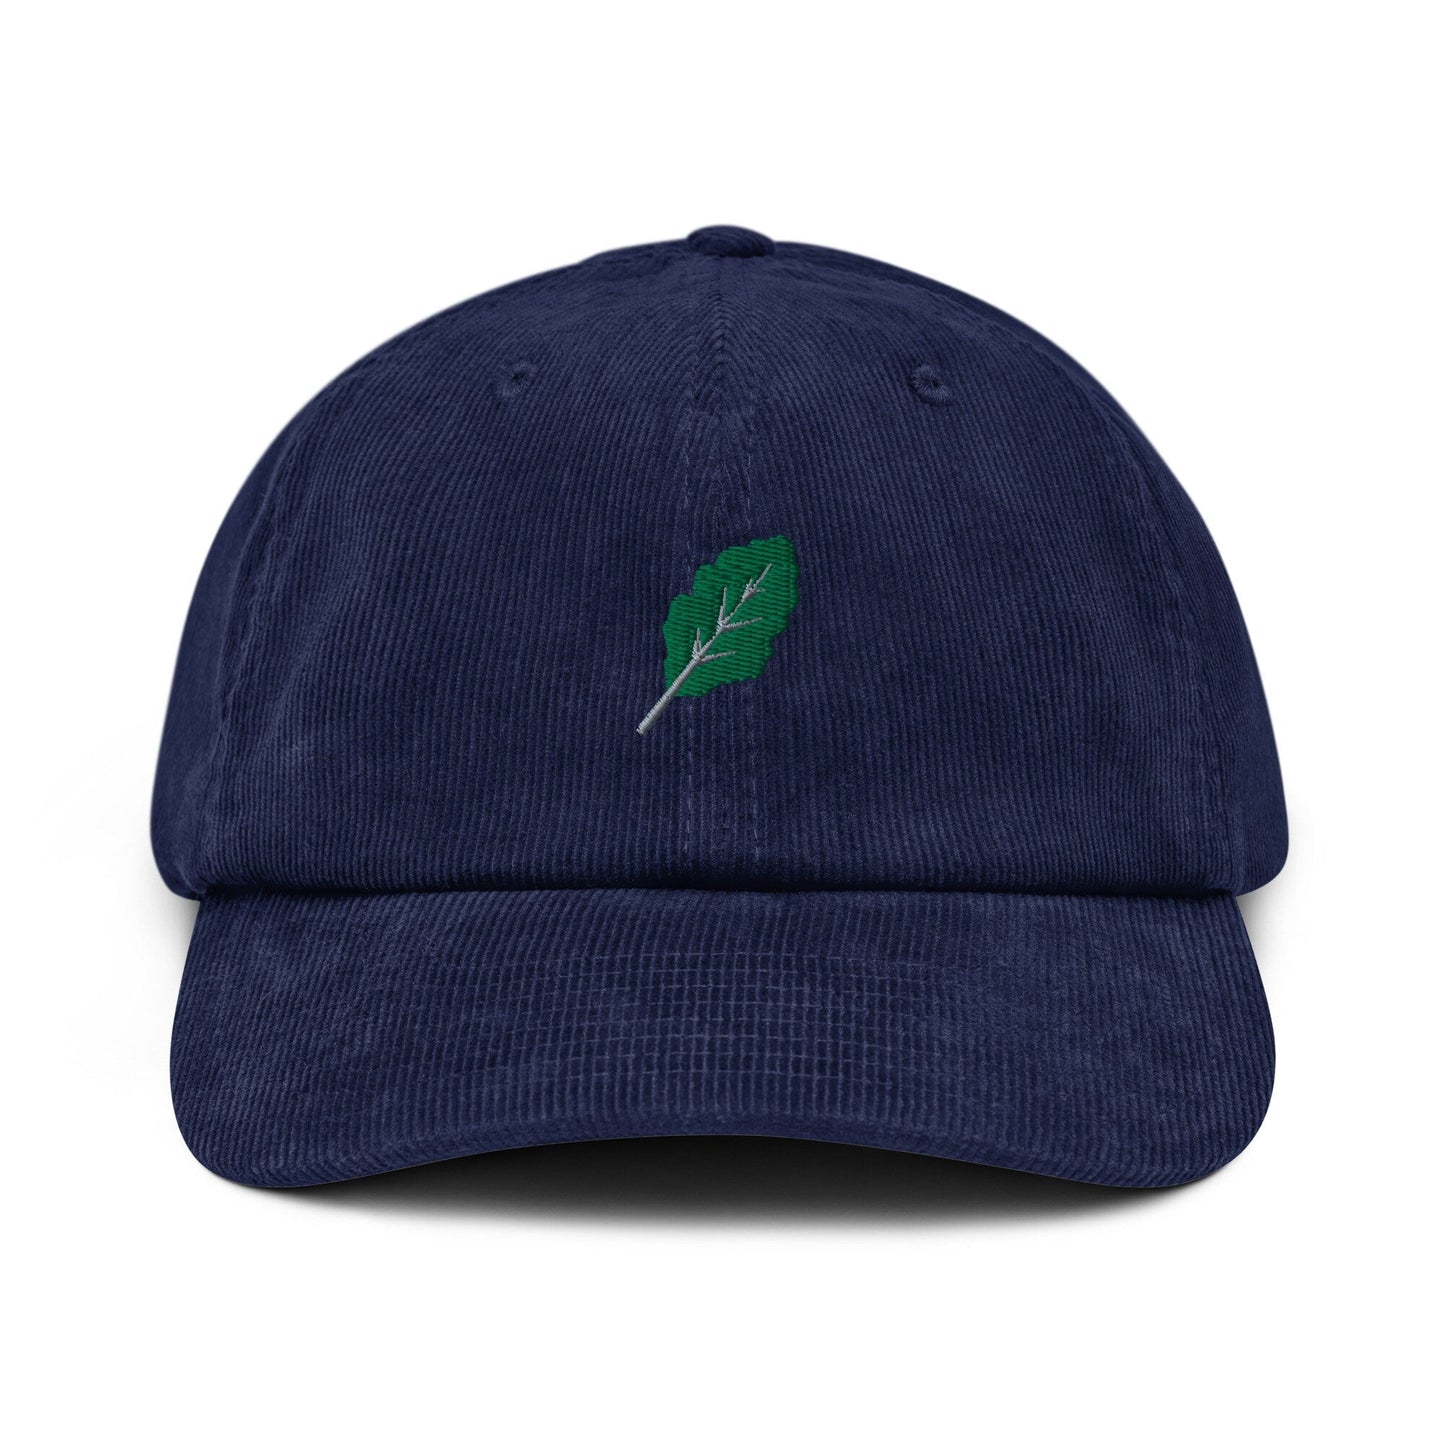 Kale Corduroy Hat - Gift for The Vegetarian Health Conscious - Handmade Embroidered Cap - Evilwater Originals